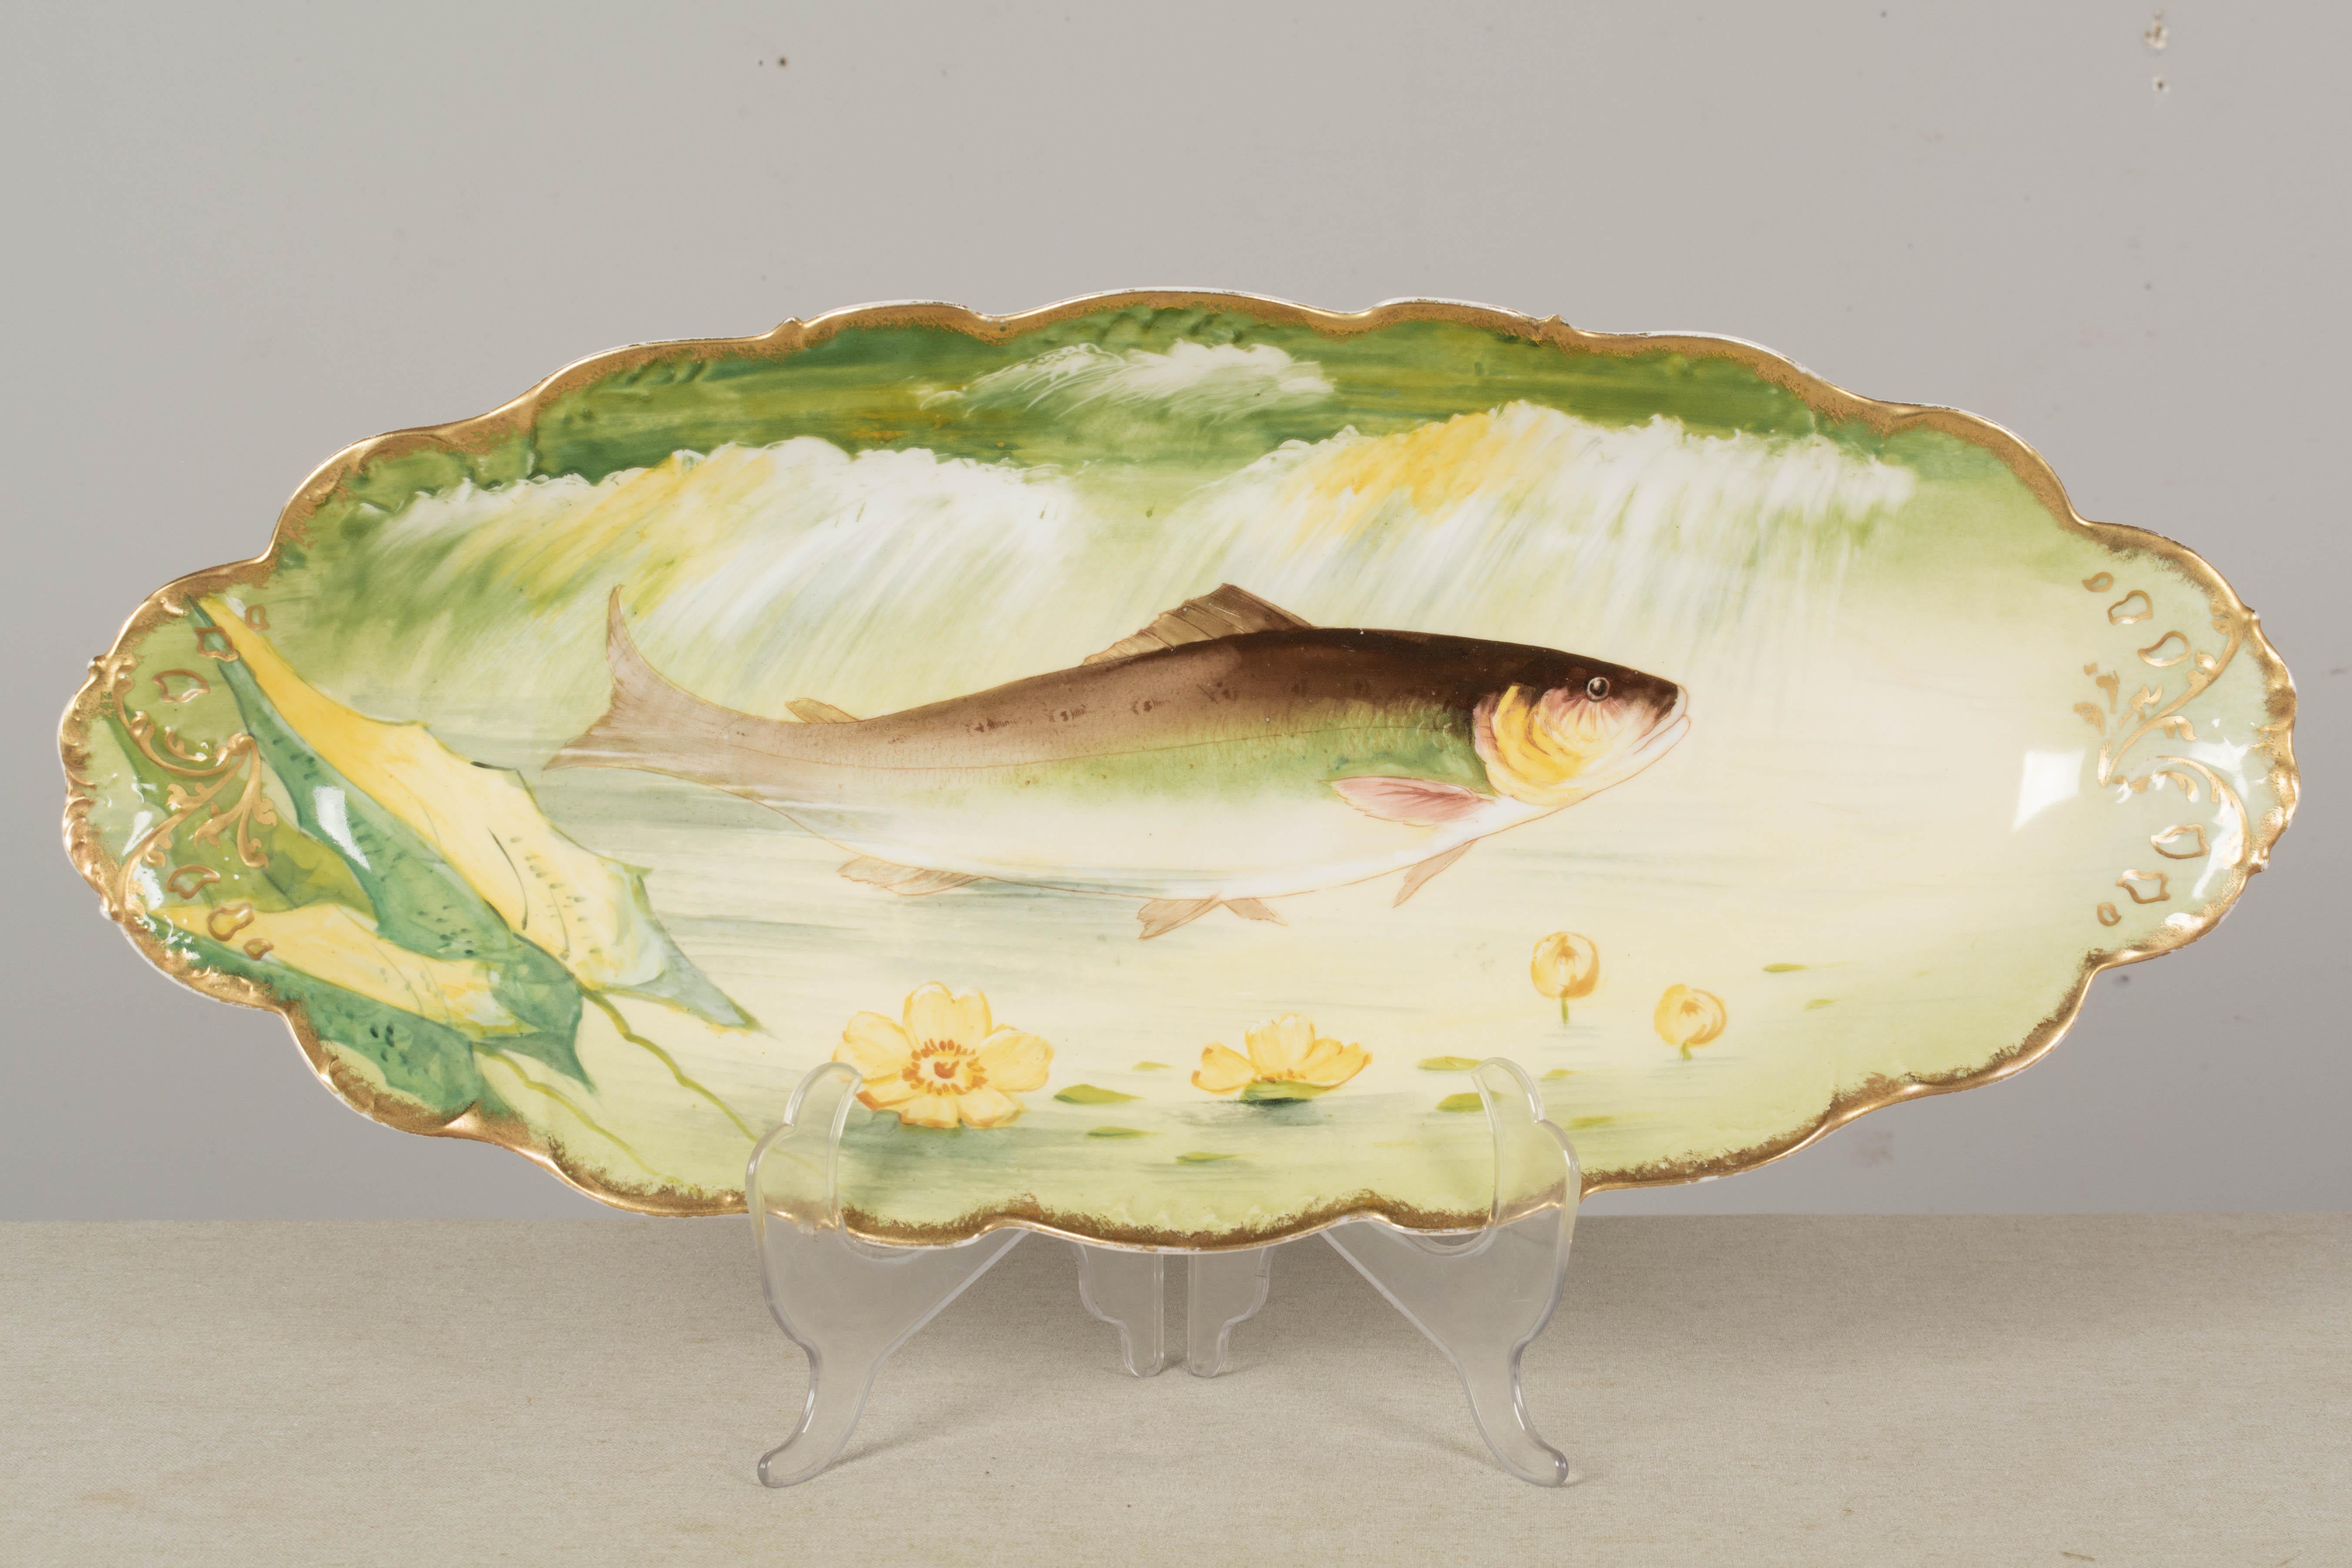 An early 20th century French Limoges porcelain fish platter and 12 plates, each hand-painted in green and yellow with gilt edge. Mark to underside: Elite Works Limoges France. (Red print indicating 1900-1914 run) Excellent condition with only one